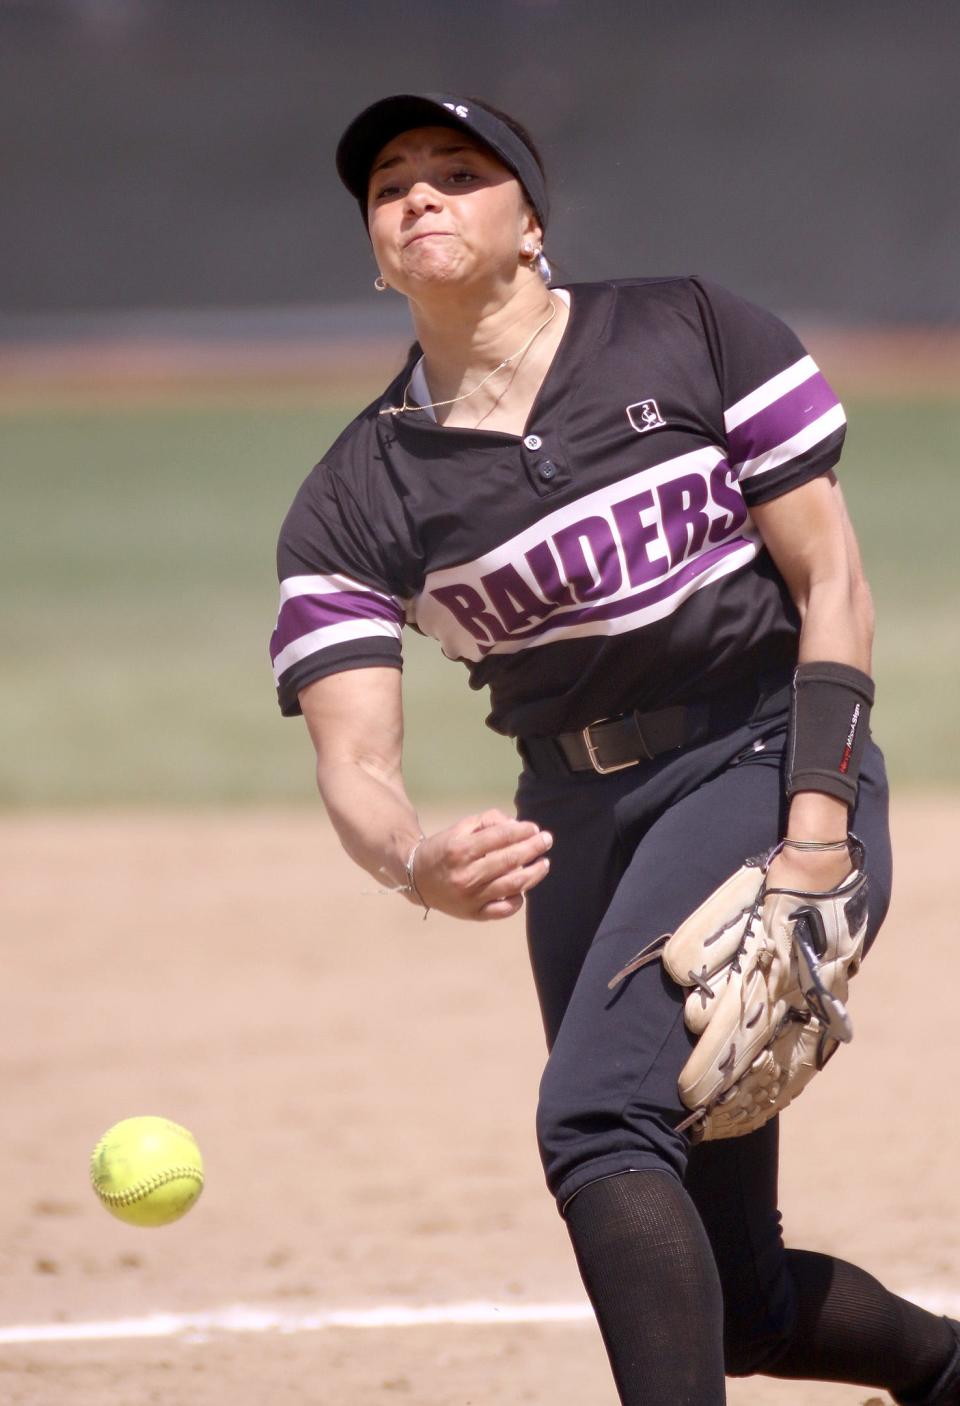 Mount Union's Alyssa Rose was named Player of the Year in the Ohio Athletic Conference.